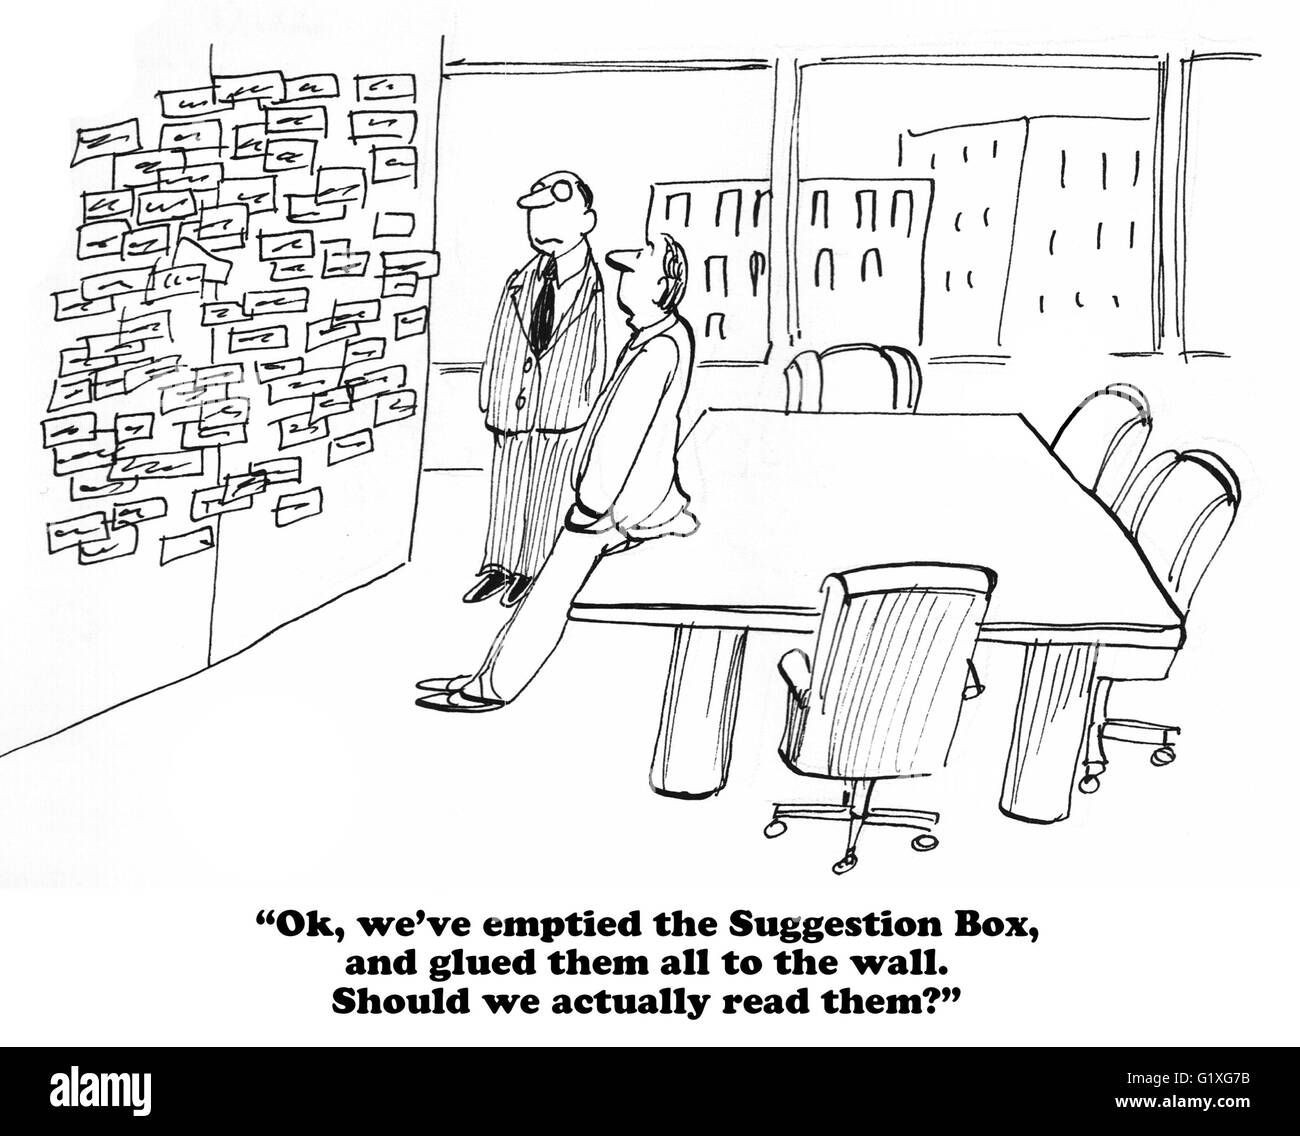 Business cartoon about actually reading the suggestions from the Suggestion  Box Stock Photo - Alamy